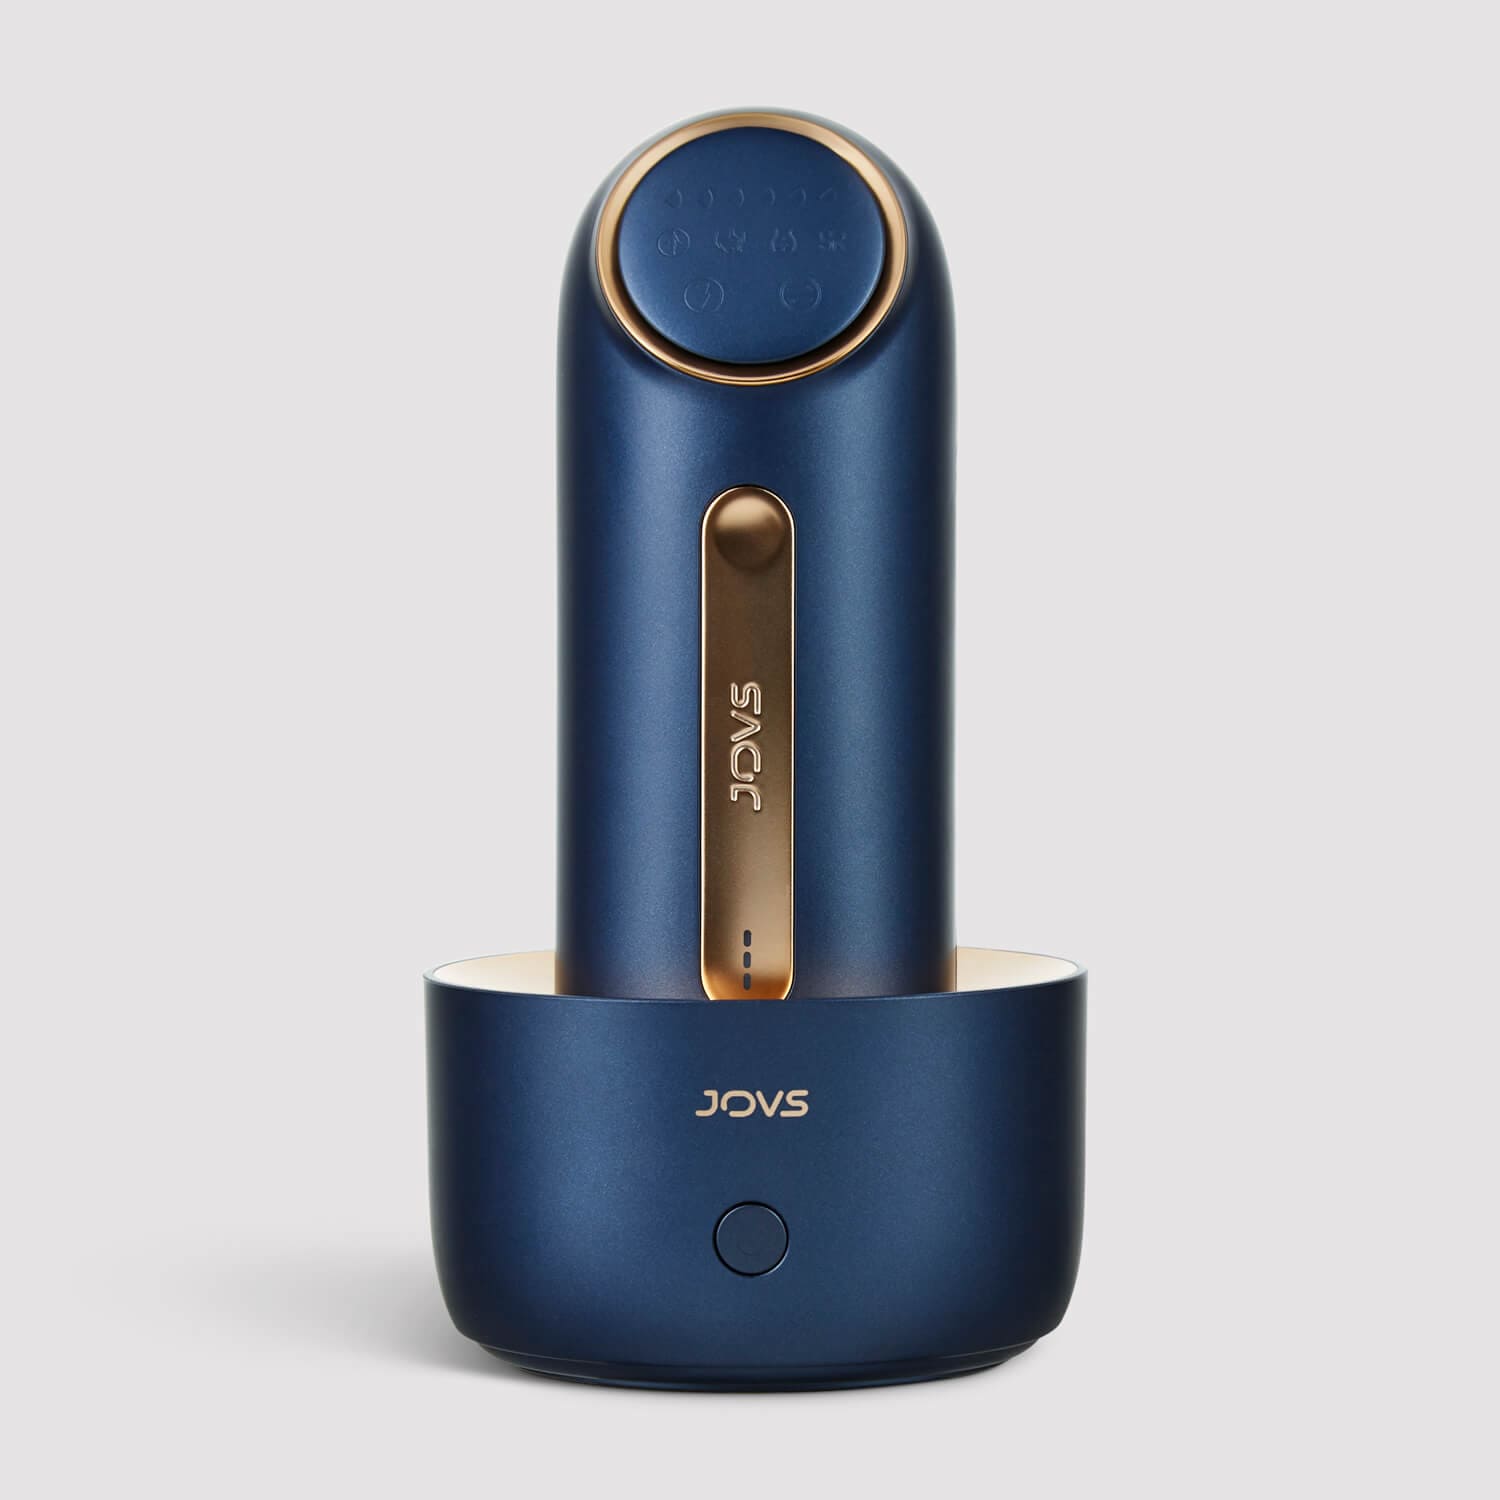 FREE JOVS Mini Hair Removal Device Exclusively for CurrentBody Skin worth £199